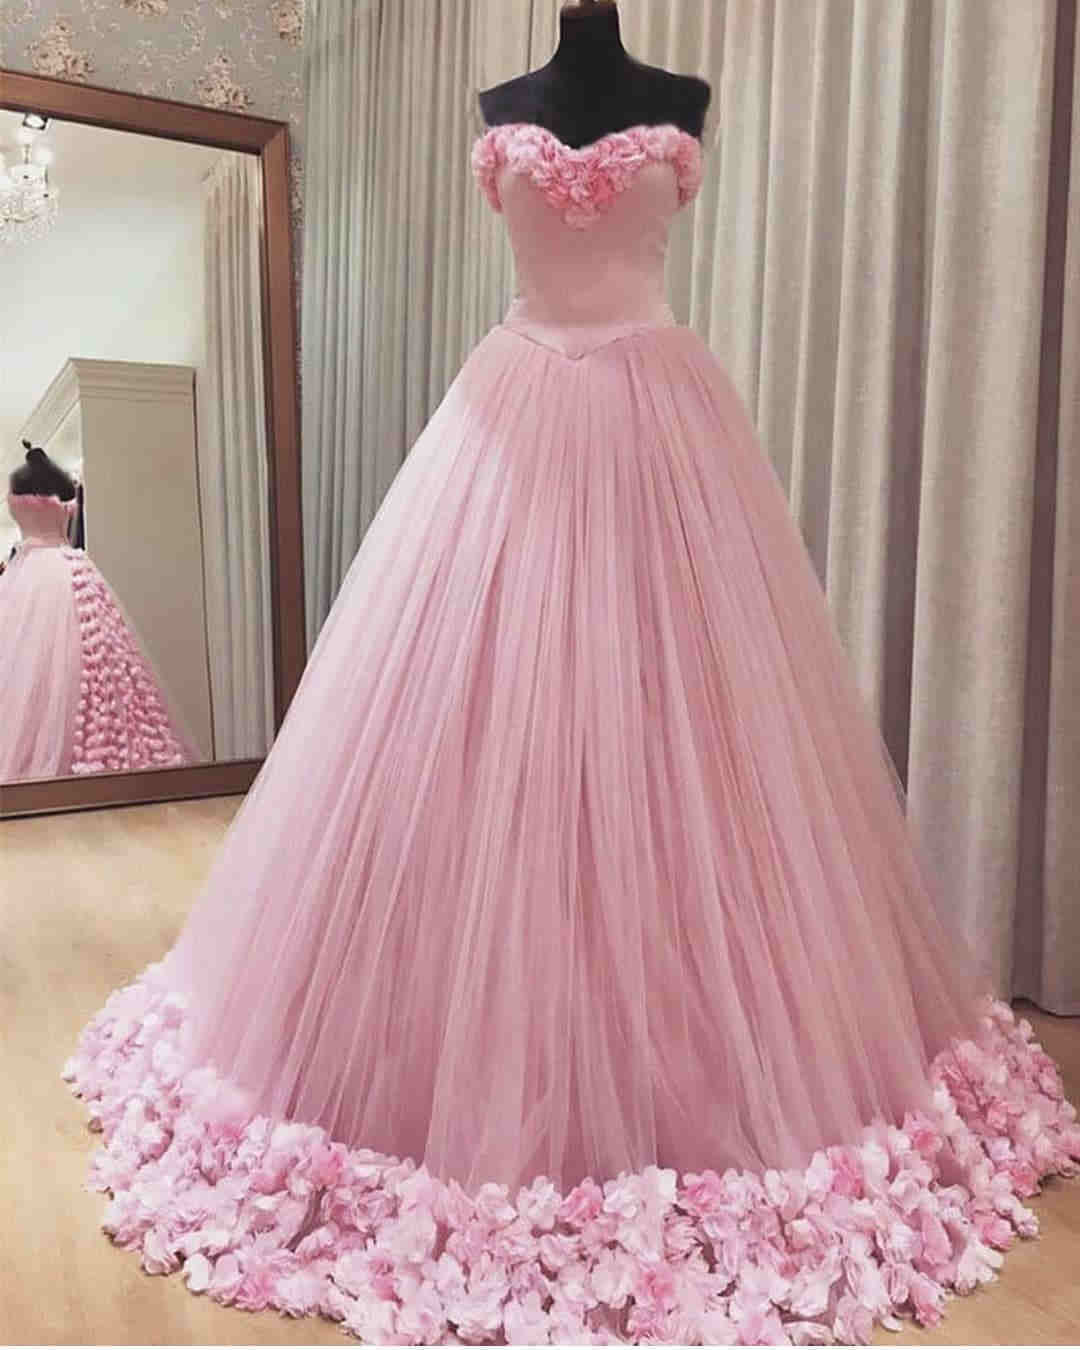 Sweetheart A-Line Pink Long Prom Dress with Flowers?Sweetheart A-Line Pink Long Prom Dress with Flowers?long dress,cheap dress,evening dress,bridal dress,prom dress 2021